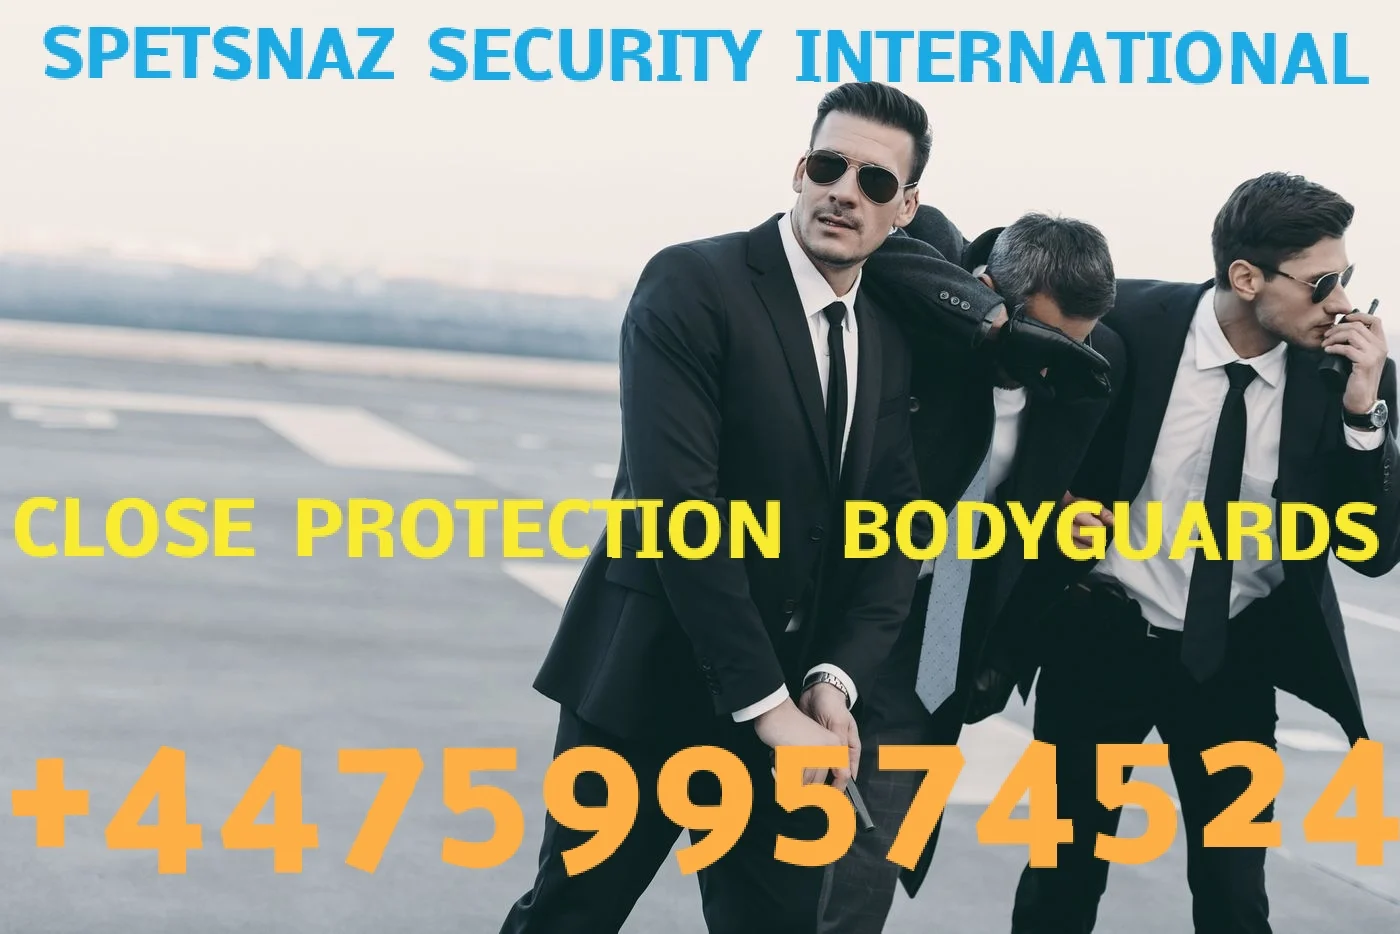 Armed Close Protection Services-Executive bodyguard-Executive Close Protection. With its close protection teams, it can work with its clients to protect their business's most valuable assets – their personnel, families, and properties- at all points in potential risk situations.-